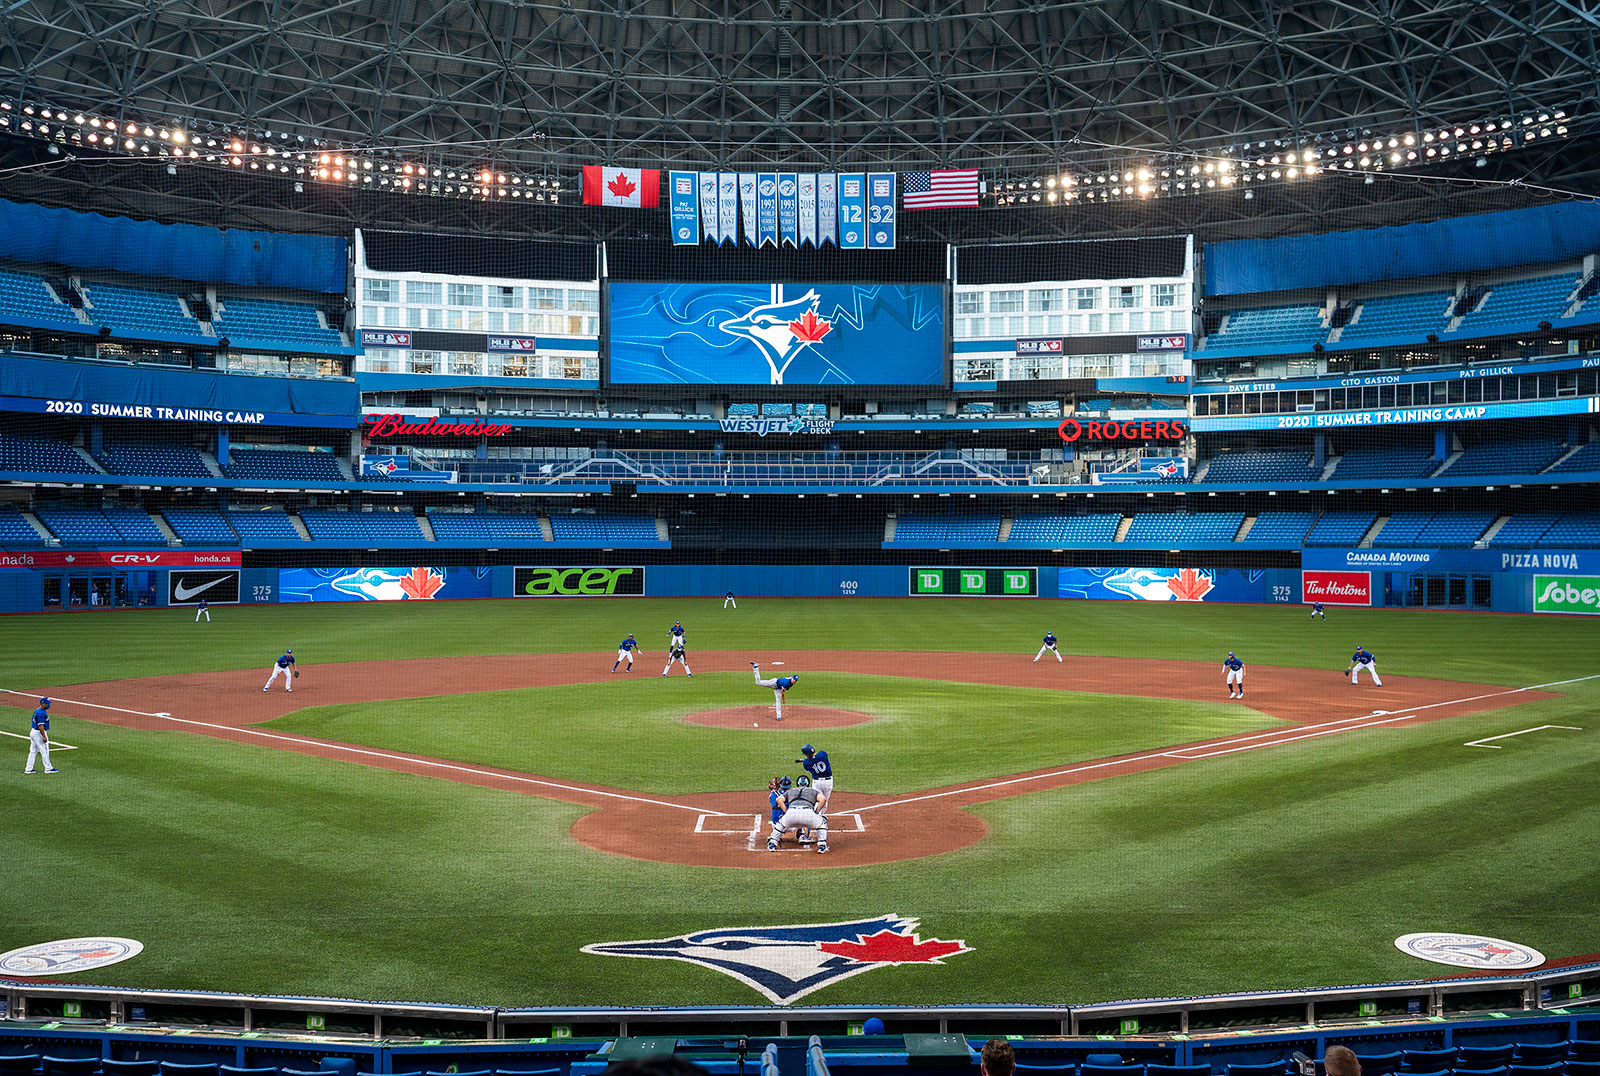 The Toronto Blue Jays play an intrasquad game at Rogers Centre in Toronto on July 9.